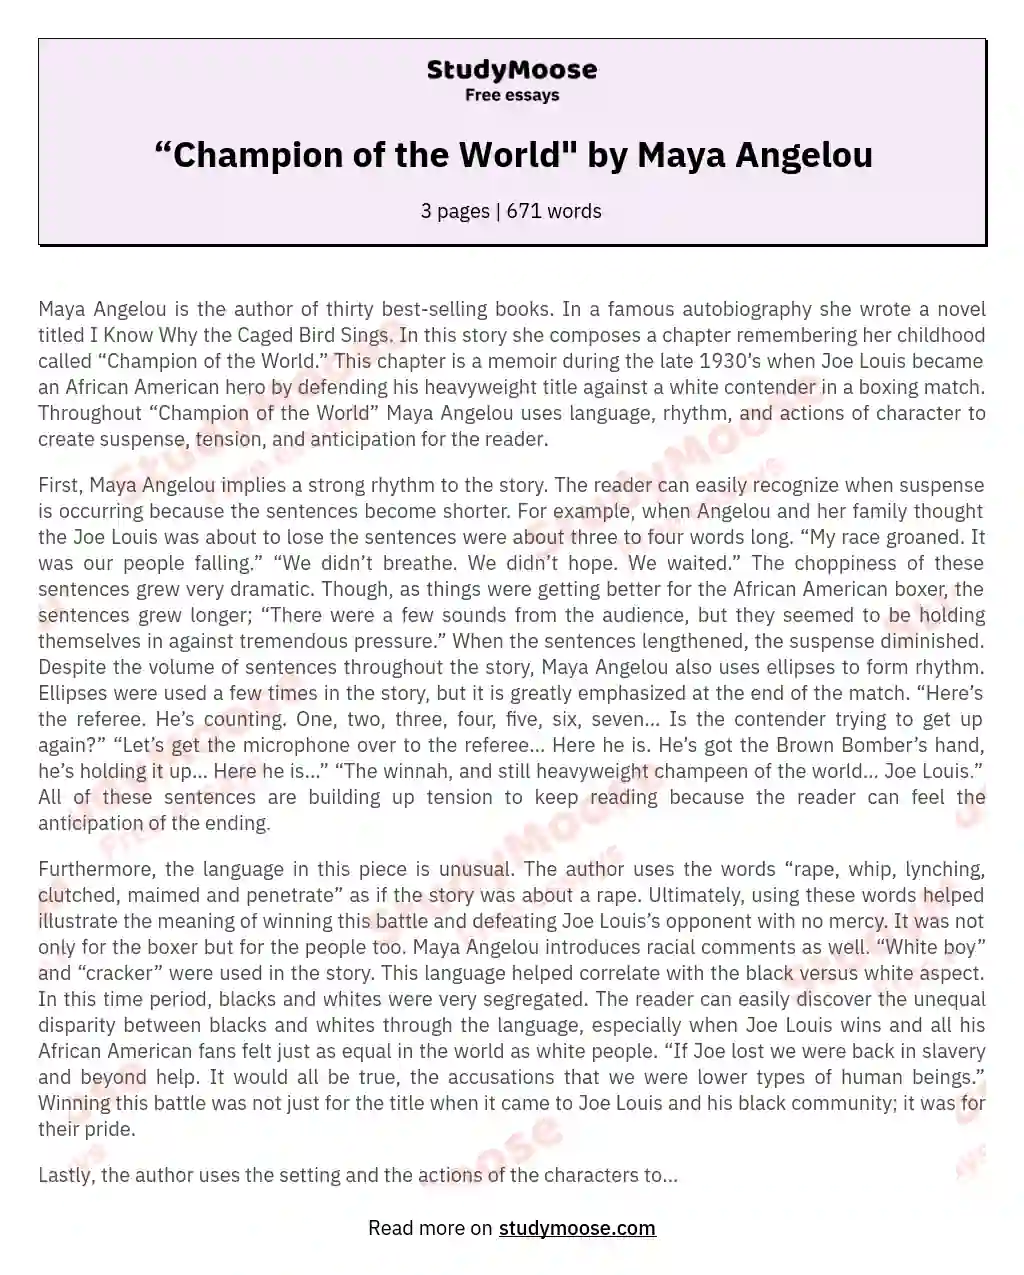 “Champion of the World" by Maya Angelou essay